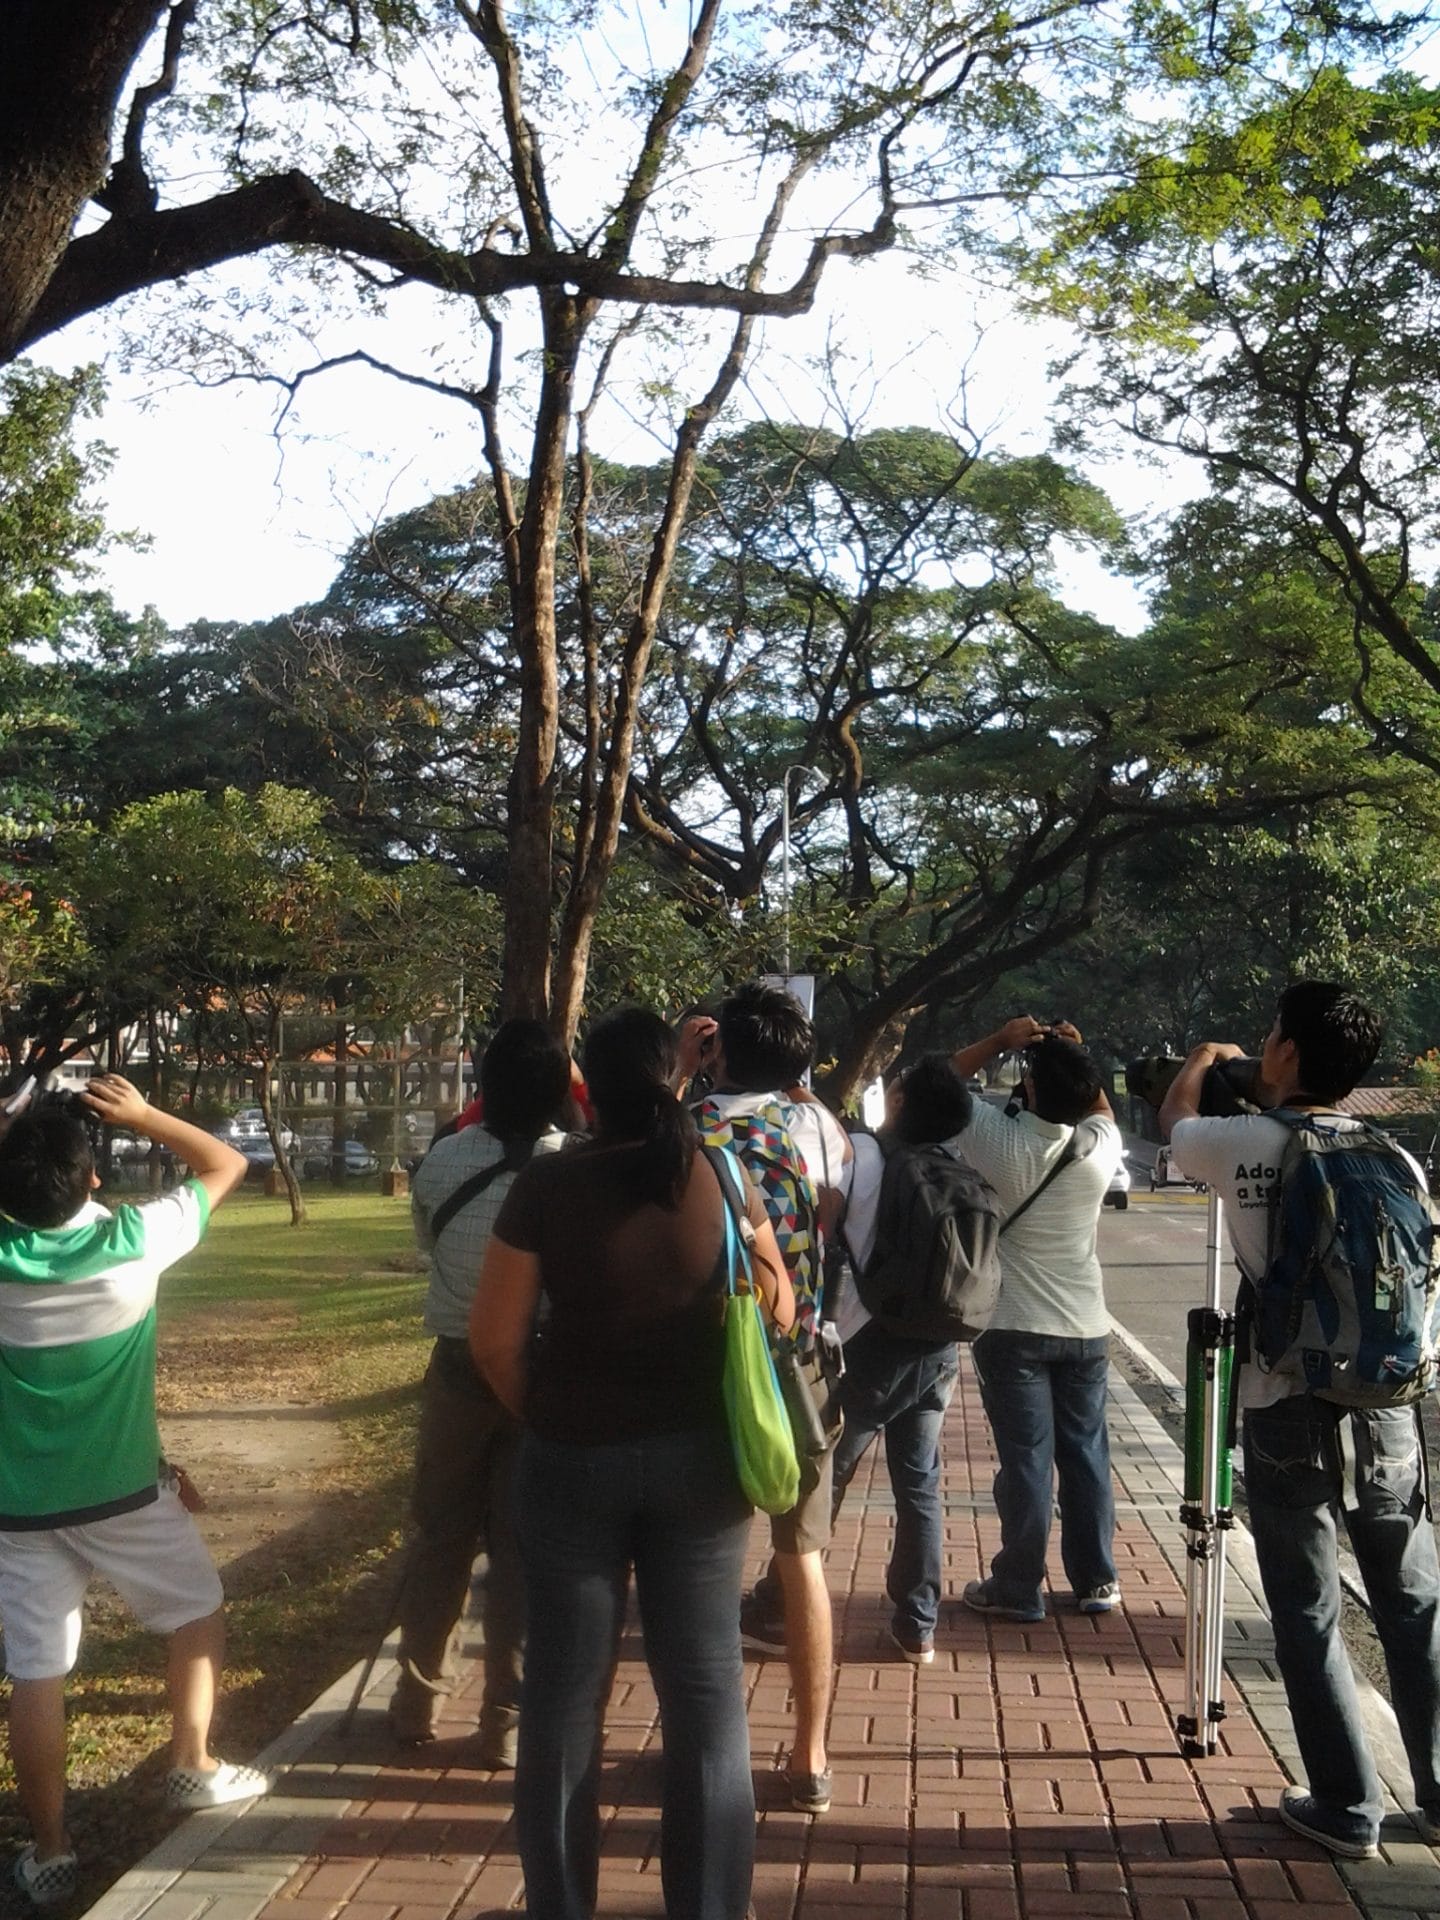 Discovering birds in their campus. Photo by Maia Tanedo